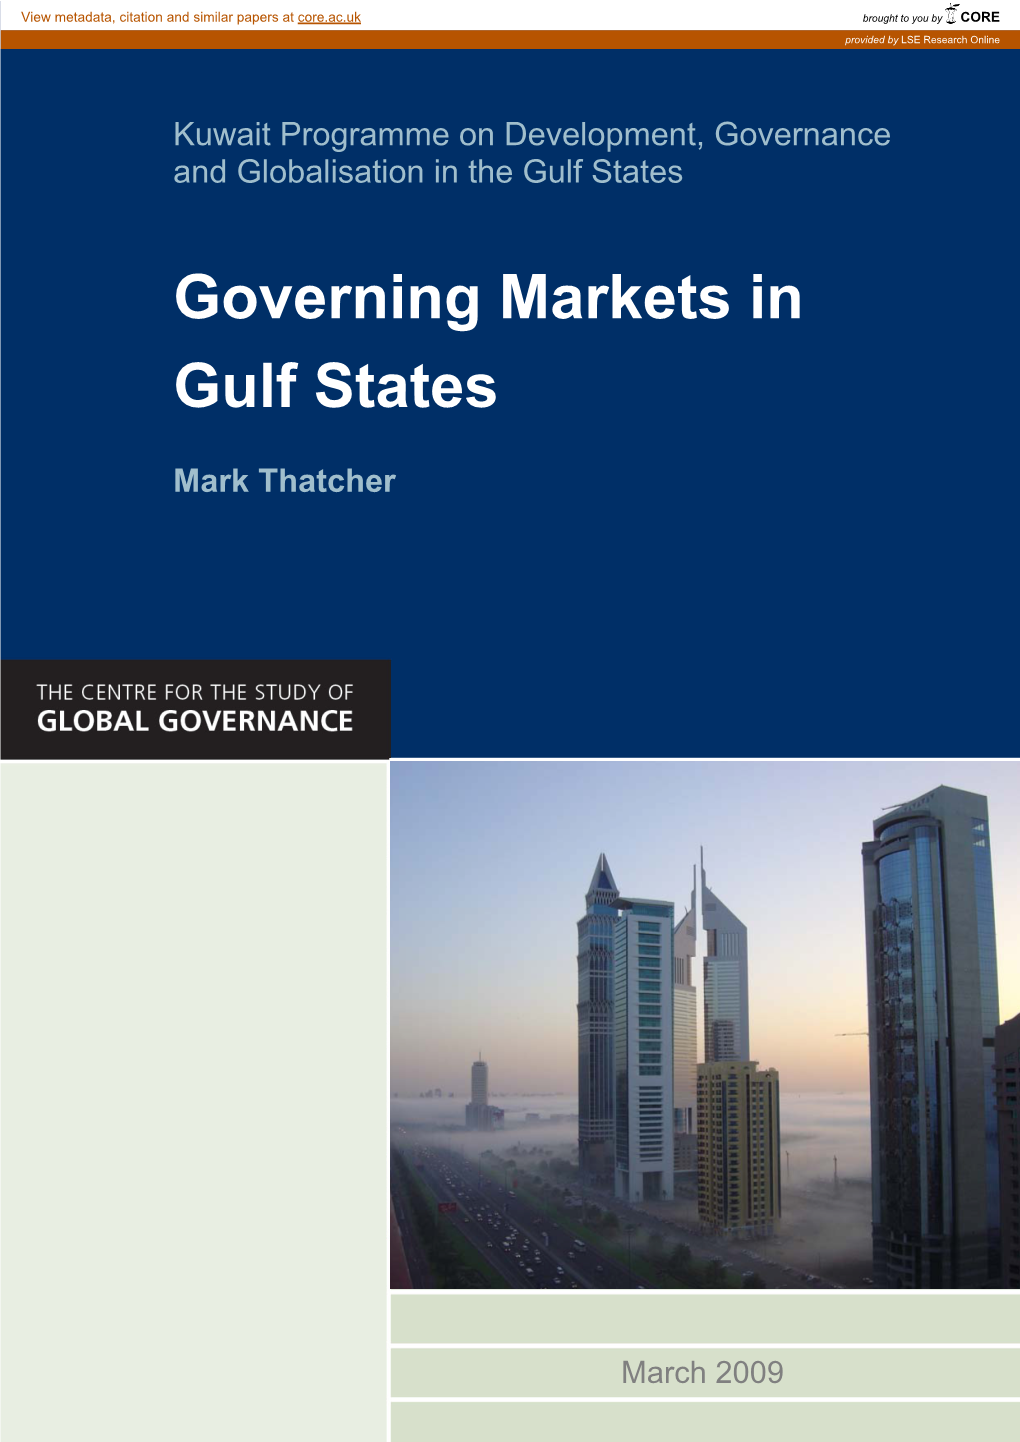 Governing Markets in Gulf States